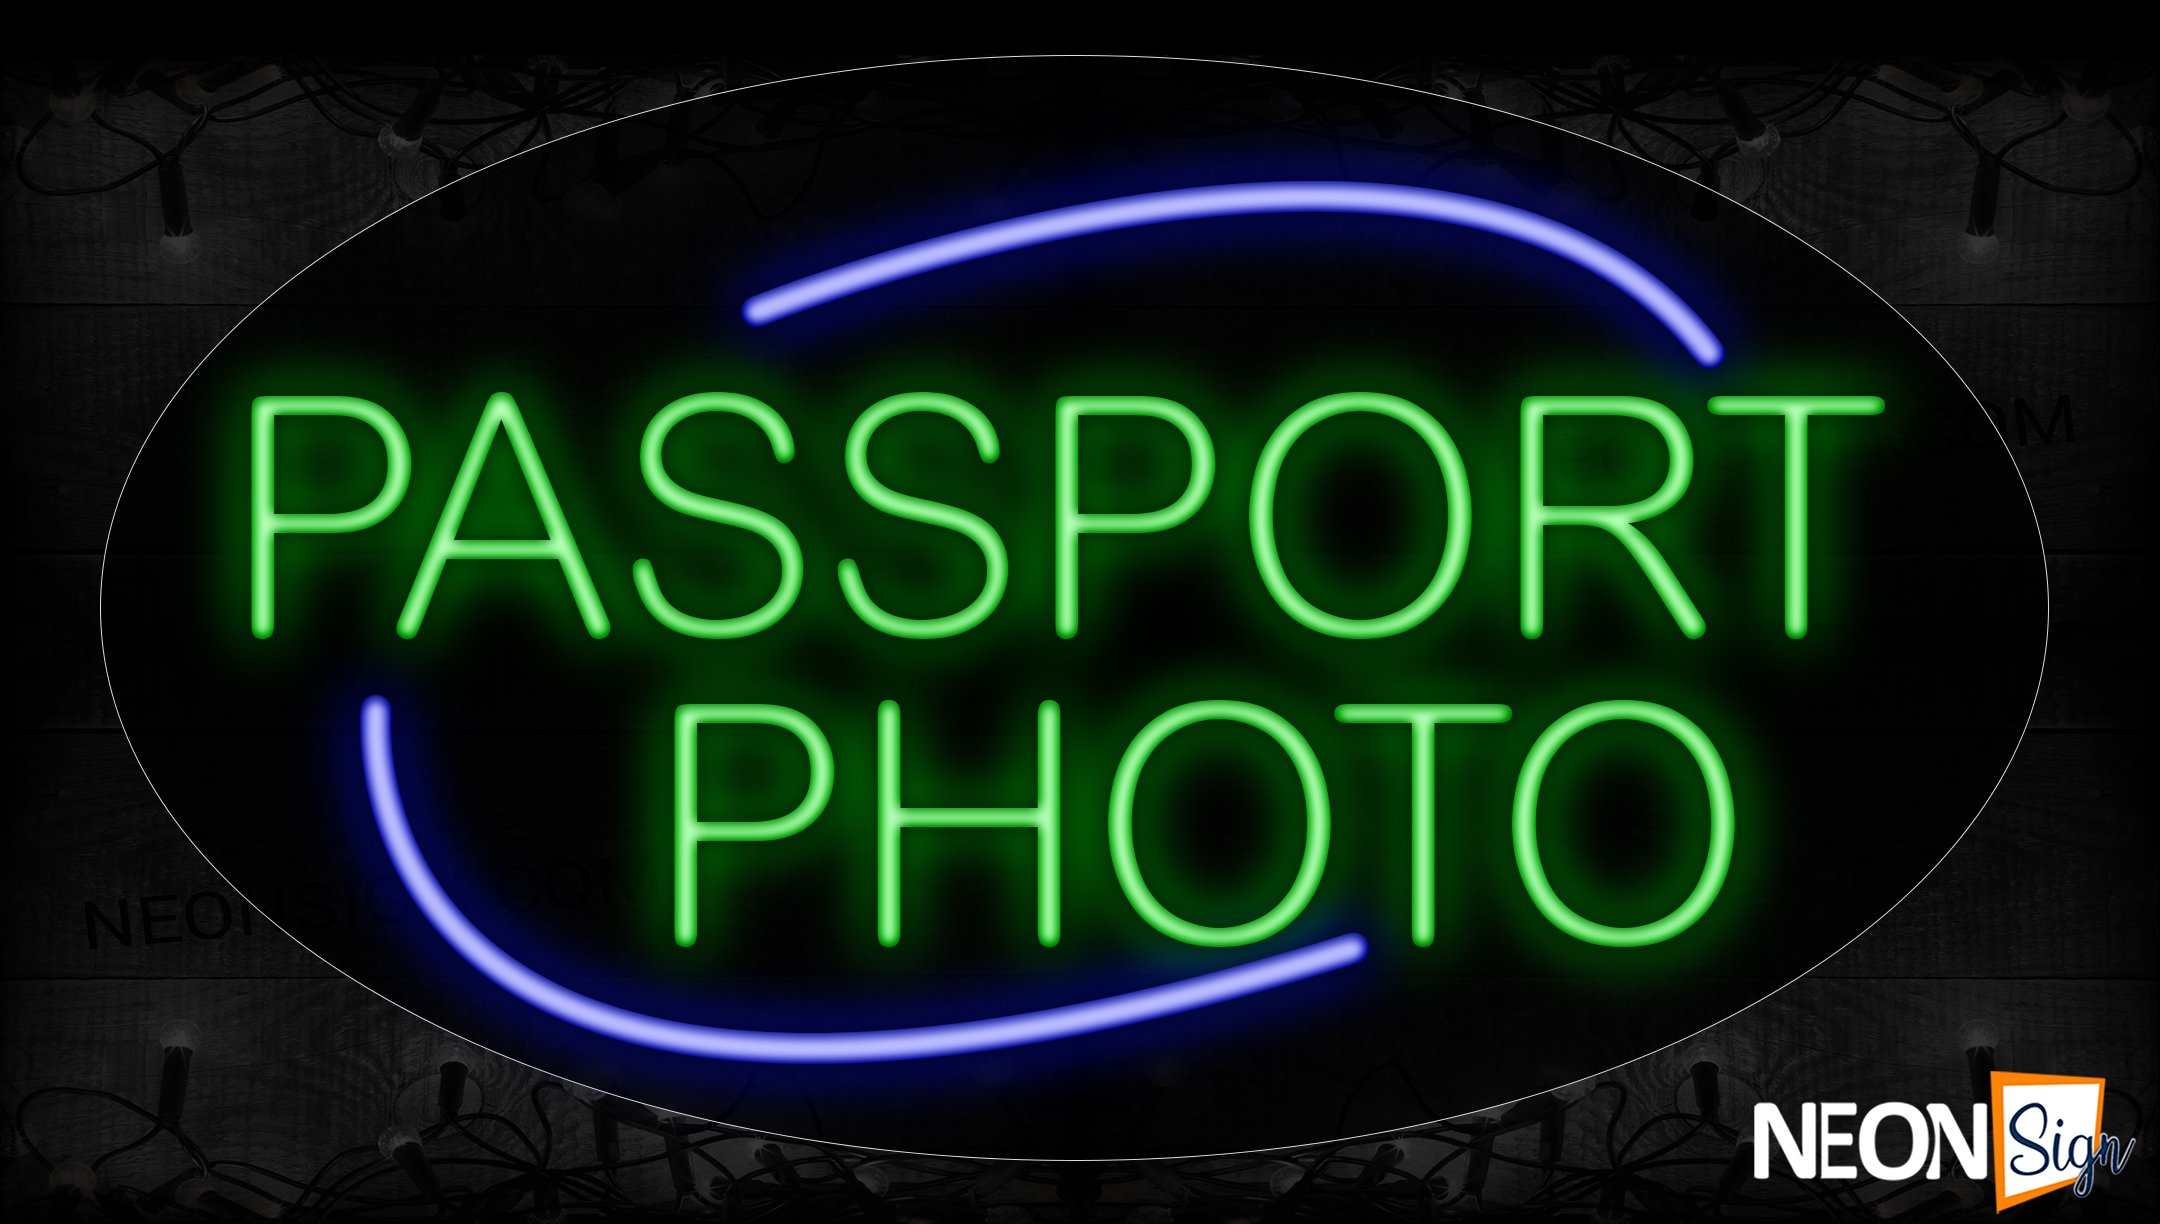 Image of 14060 Passport Photo With Blue Arc Border Neon Signs_17x30 Contoured Black Backing